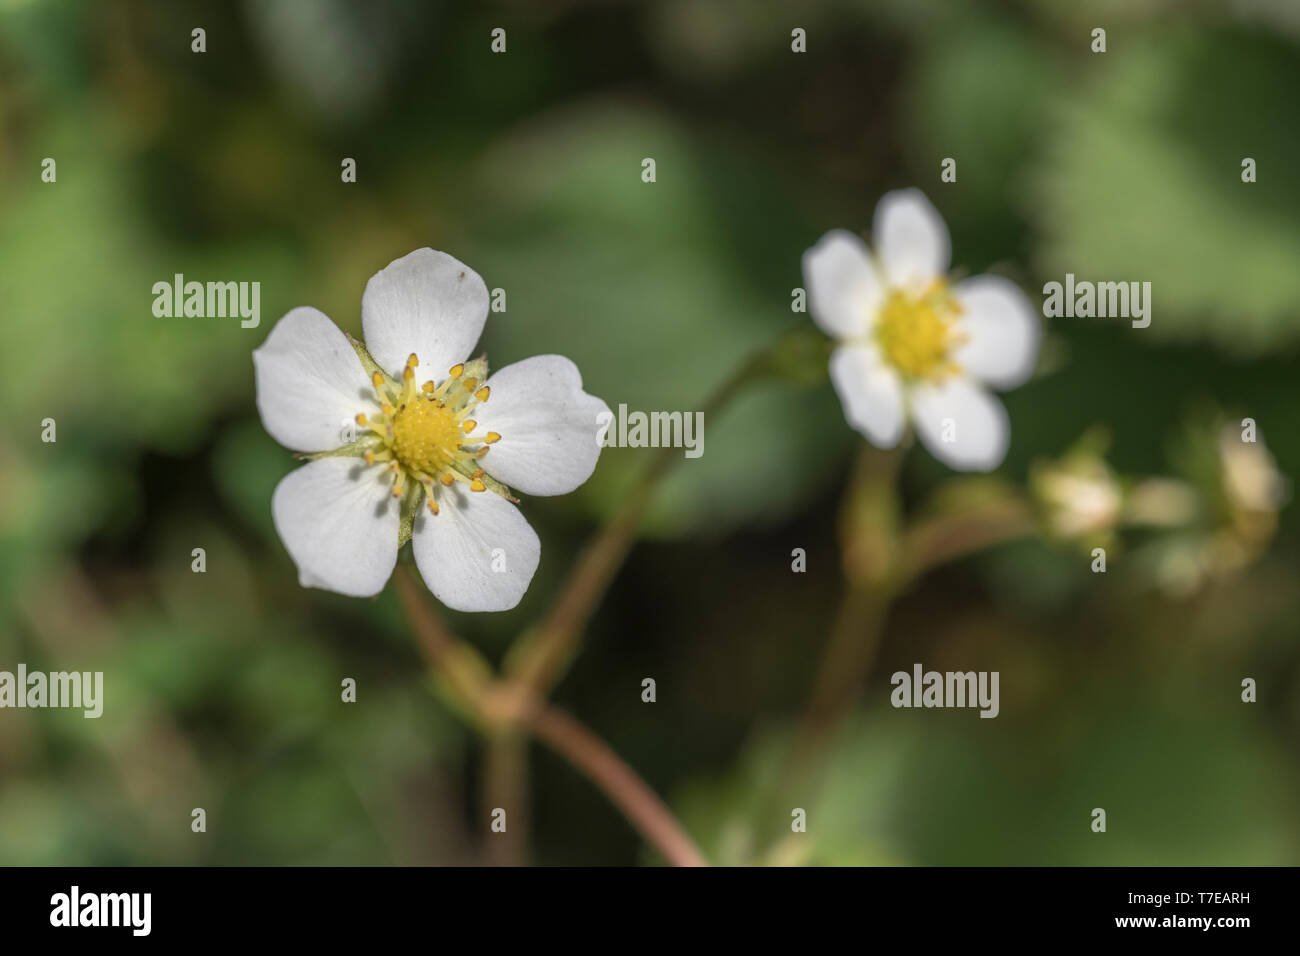 Macro close-up of flowers of Wild Strawberry / Fragaria vesca - a real hedgerow / countryside treat for wild food foragers. Stock Photo